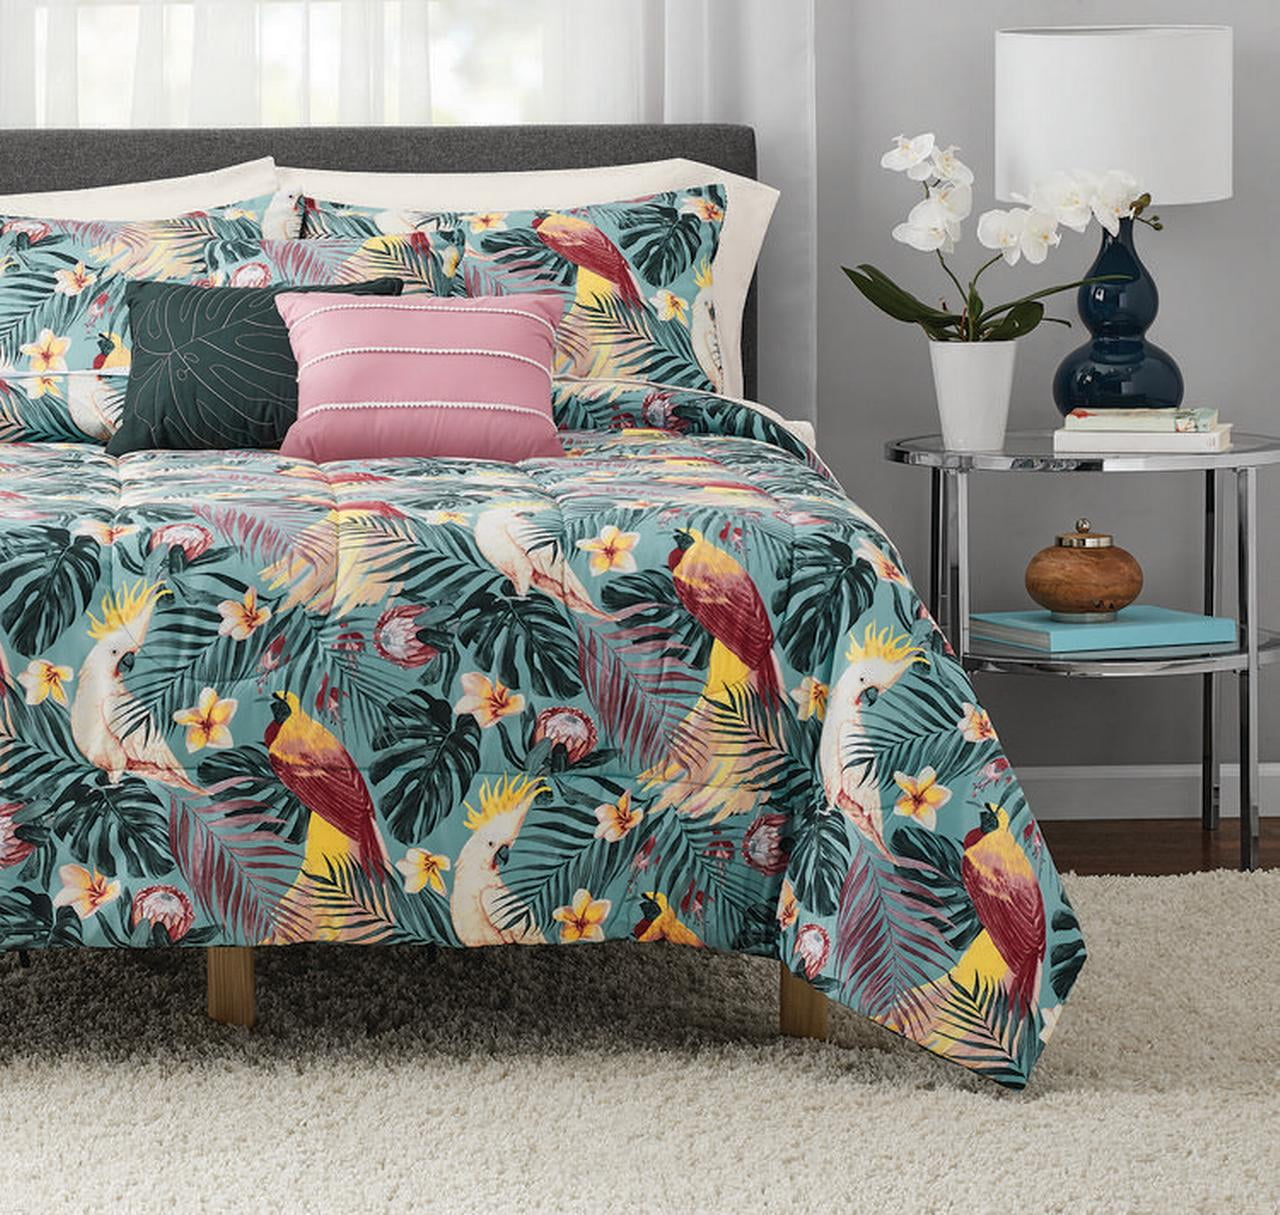 Mainstays Reversible Tropical Birds 8-Piece Complete Bed in a Bag